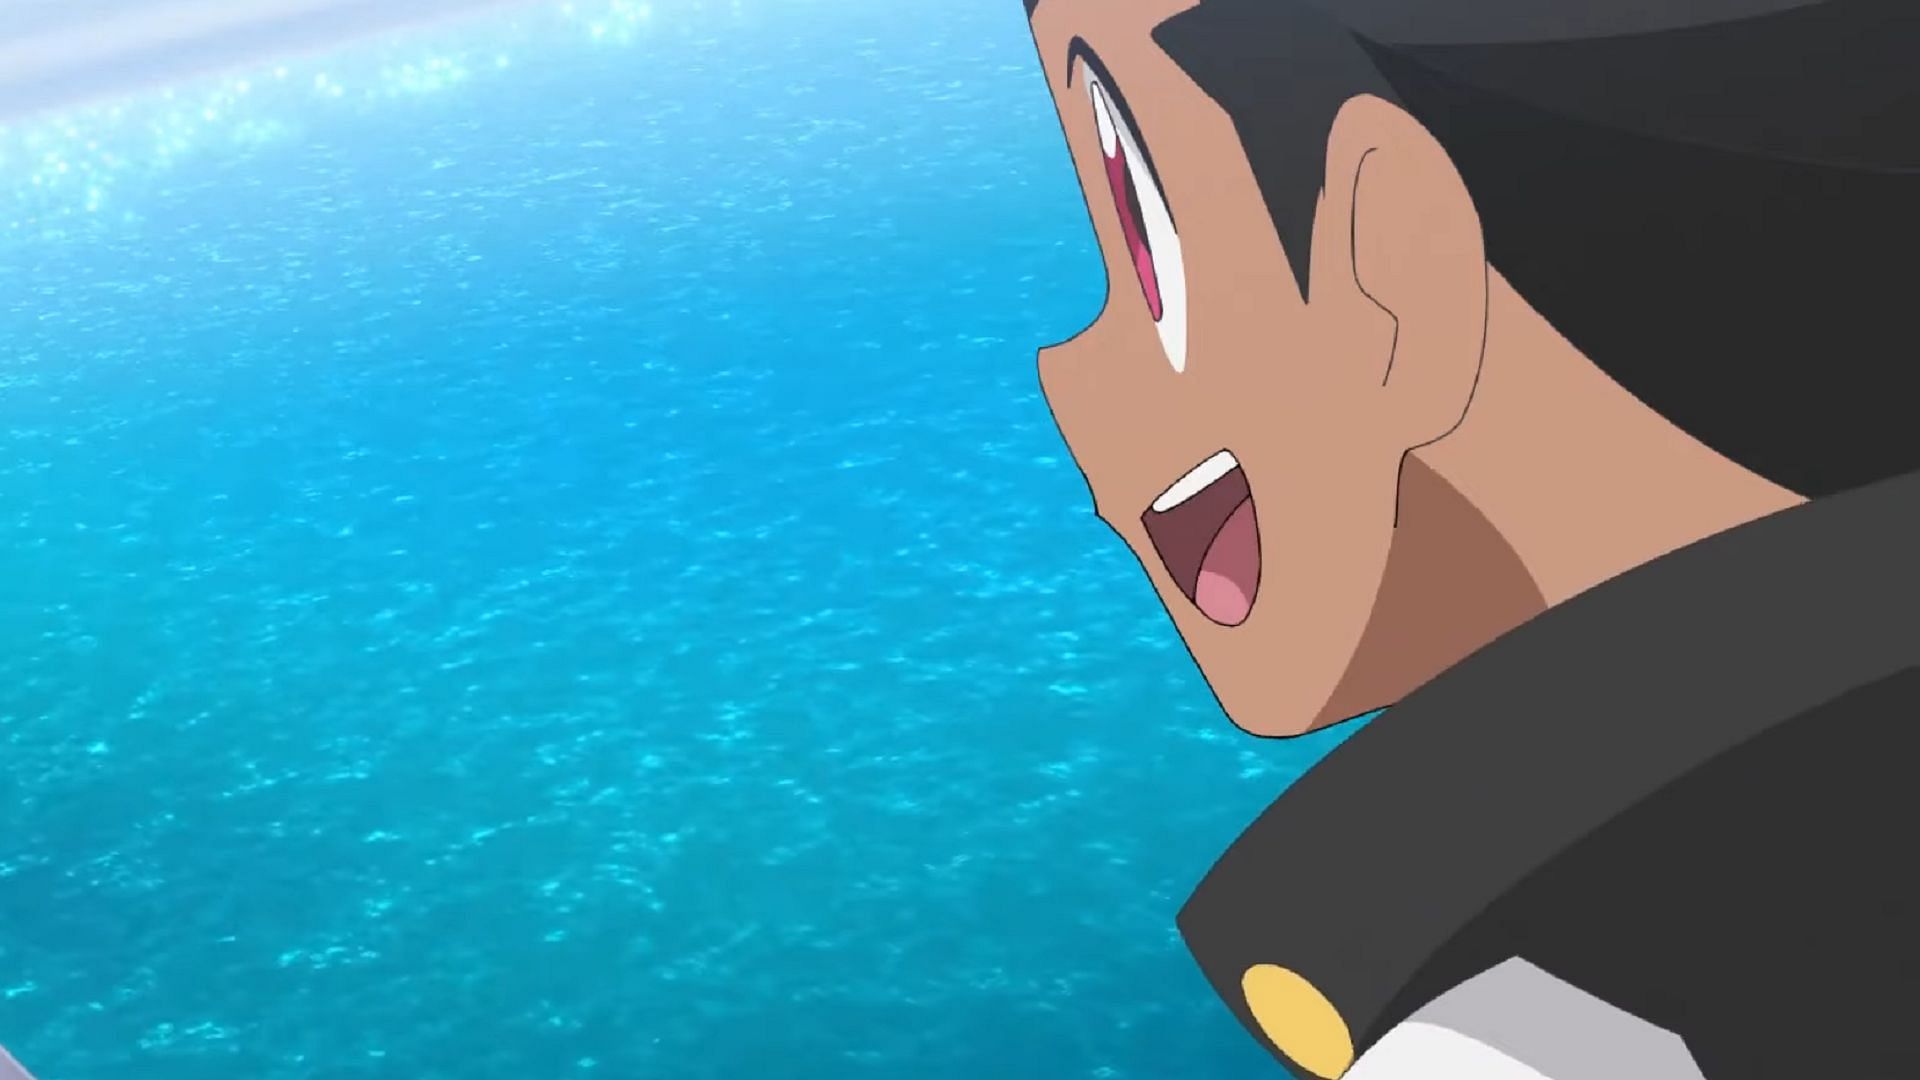 The Brave Olivine heads for open waters in Pokemon Horizons Episode 31 (Image via The Pokemon Company)